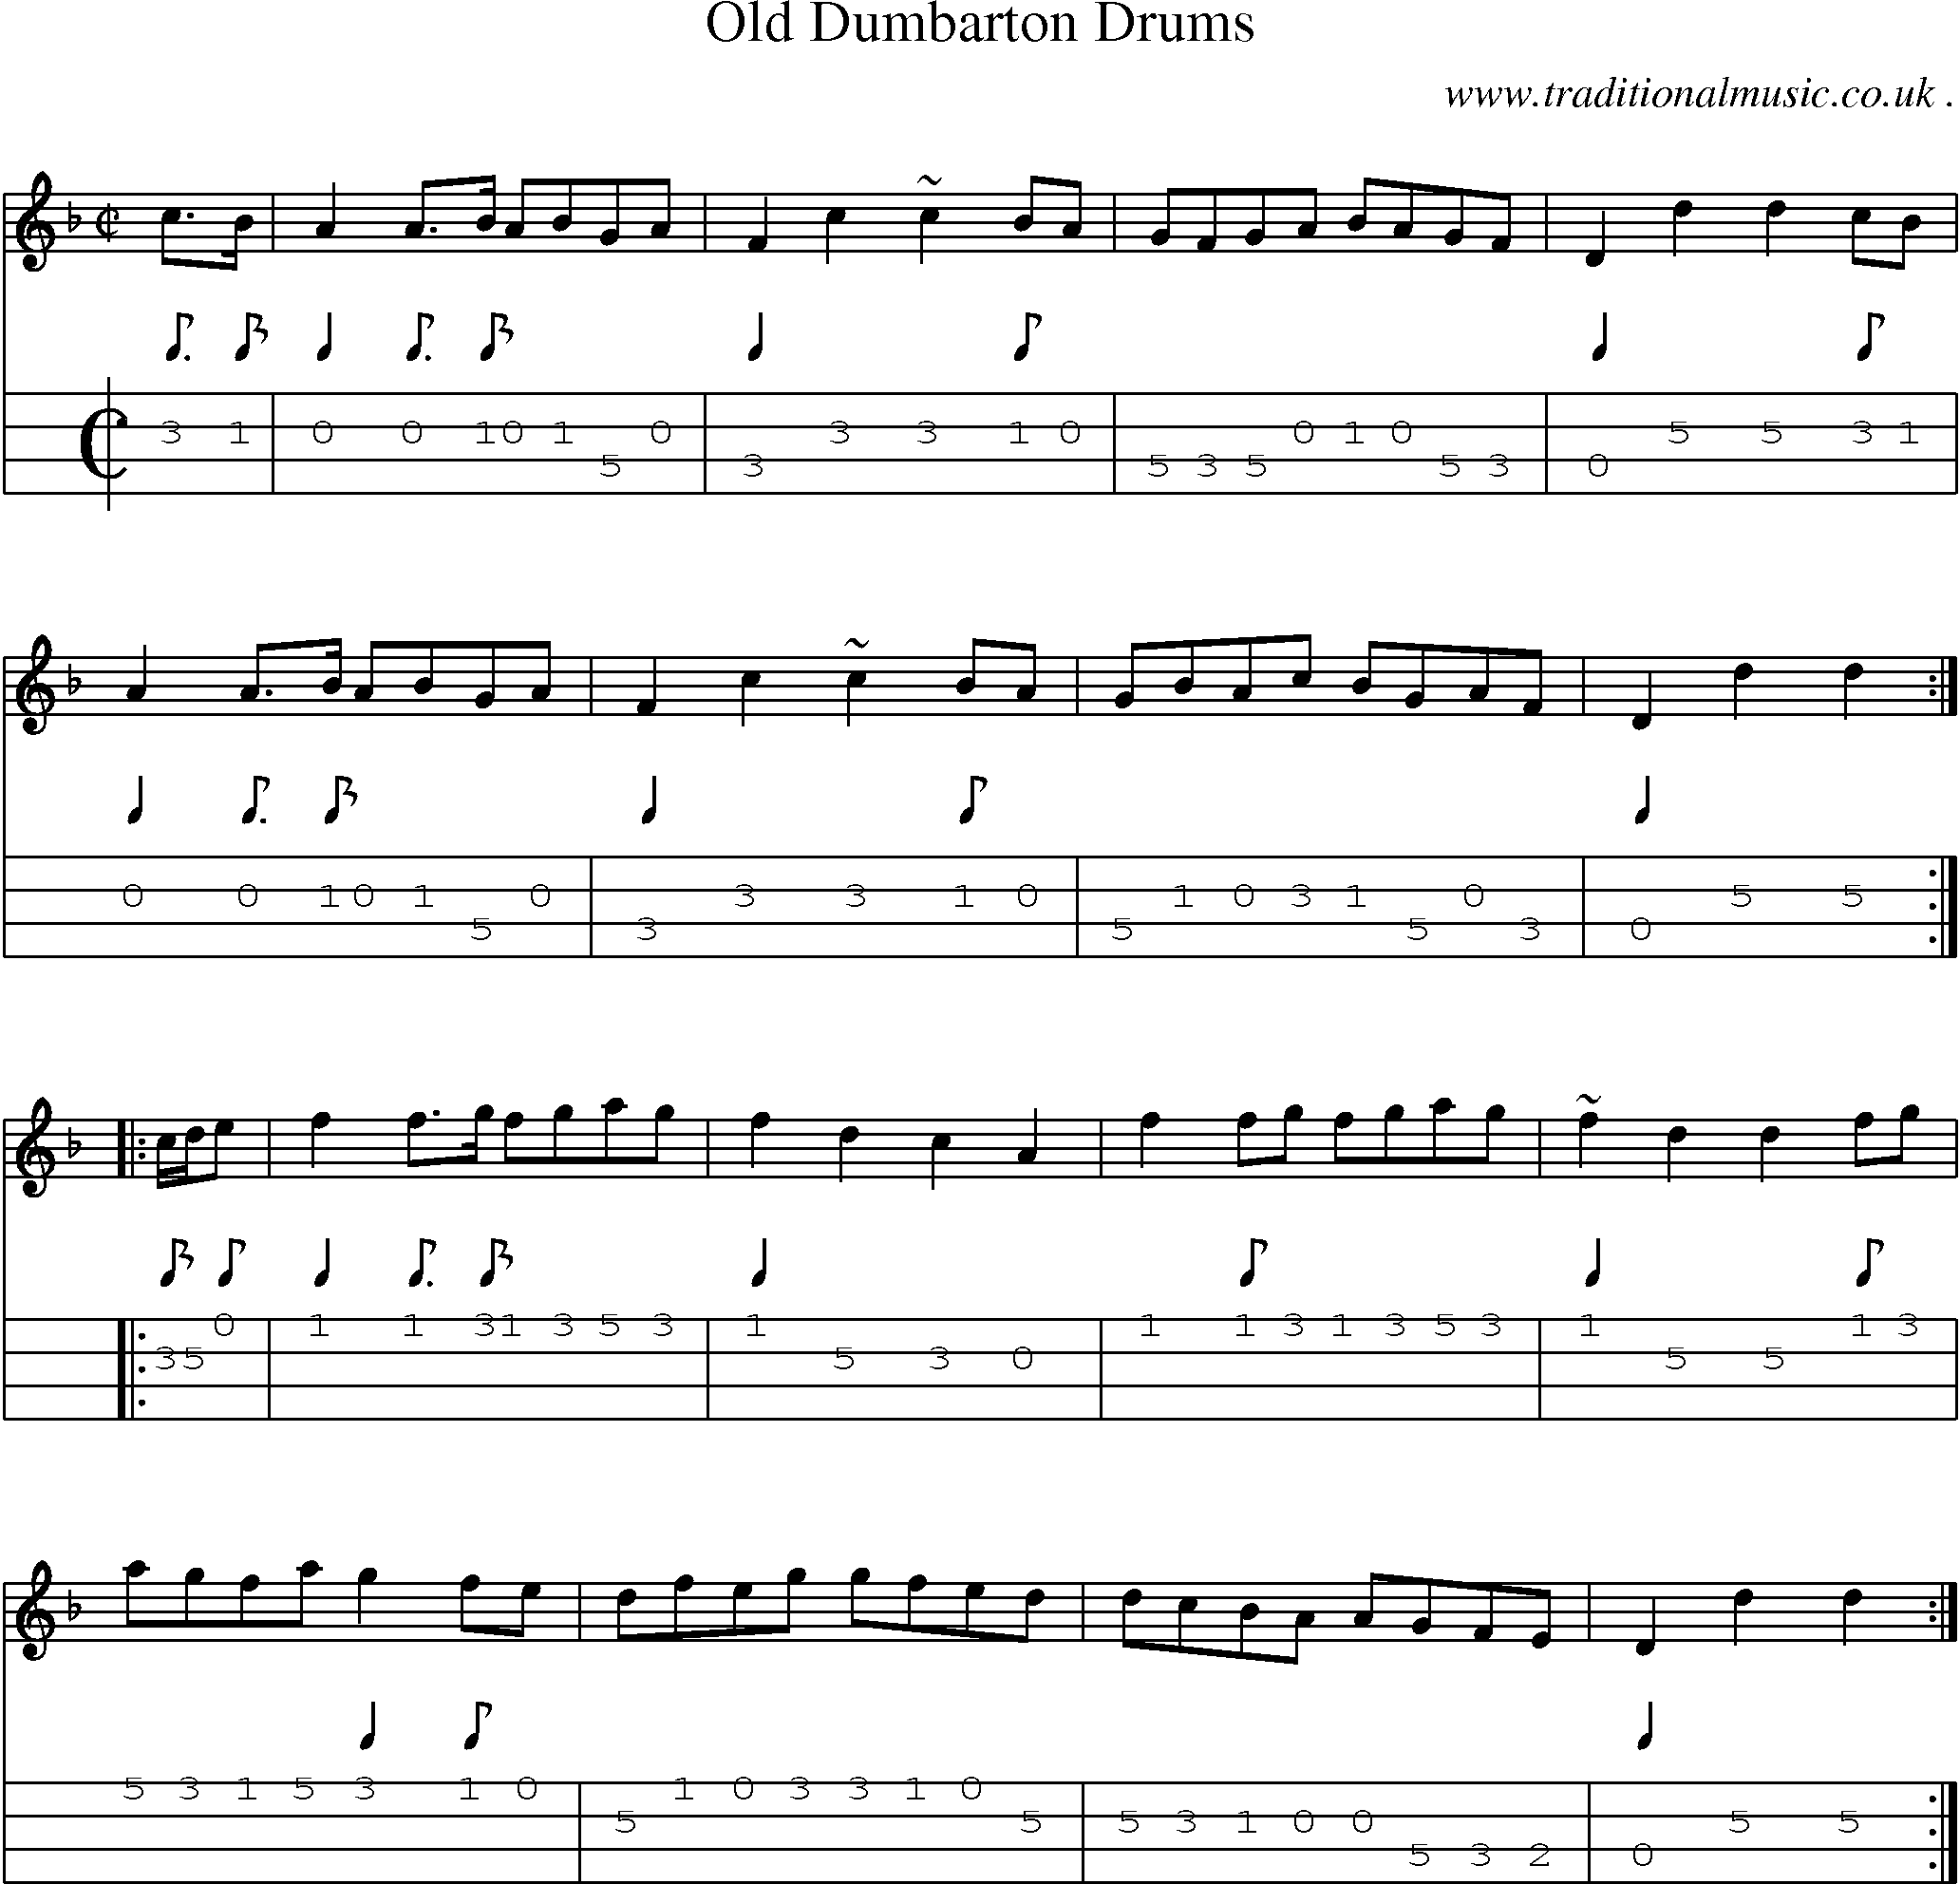 Sheet-music  score, Chords and Mandolin Tabs for Old Dumbarton Drums